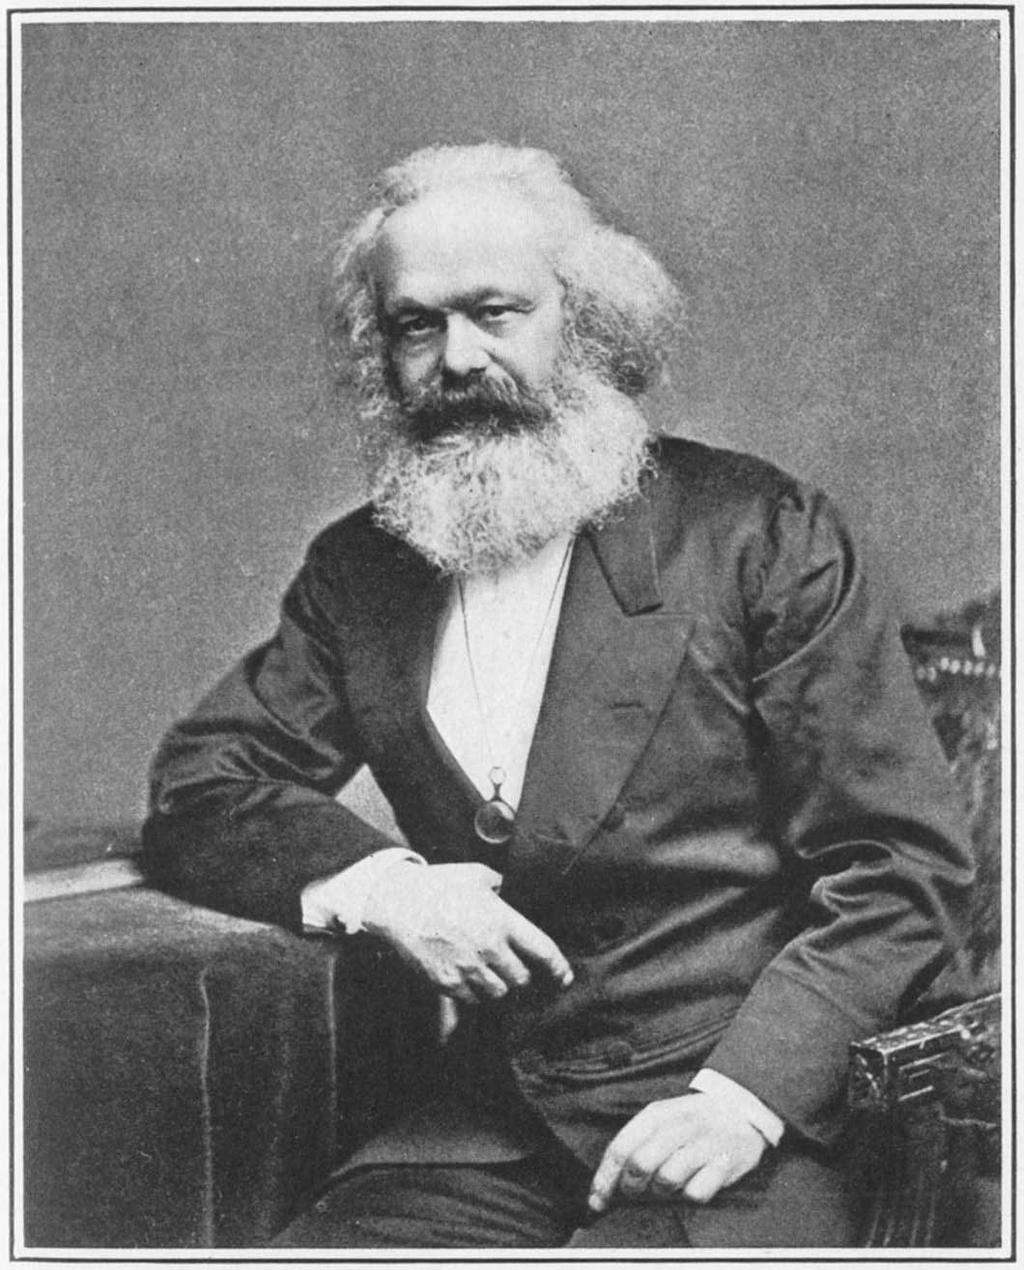 Who is Karl Marx? What is The Communist Manifesto? Directions: Read the excerpt below and respond to the questions on the right. Karl Marx Source: https://upload.wikimedia.